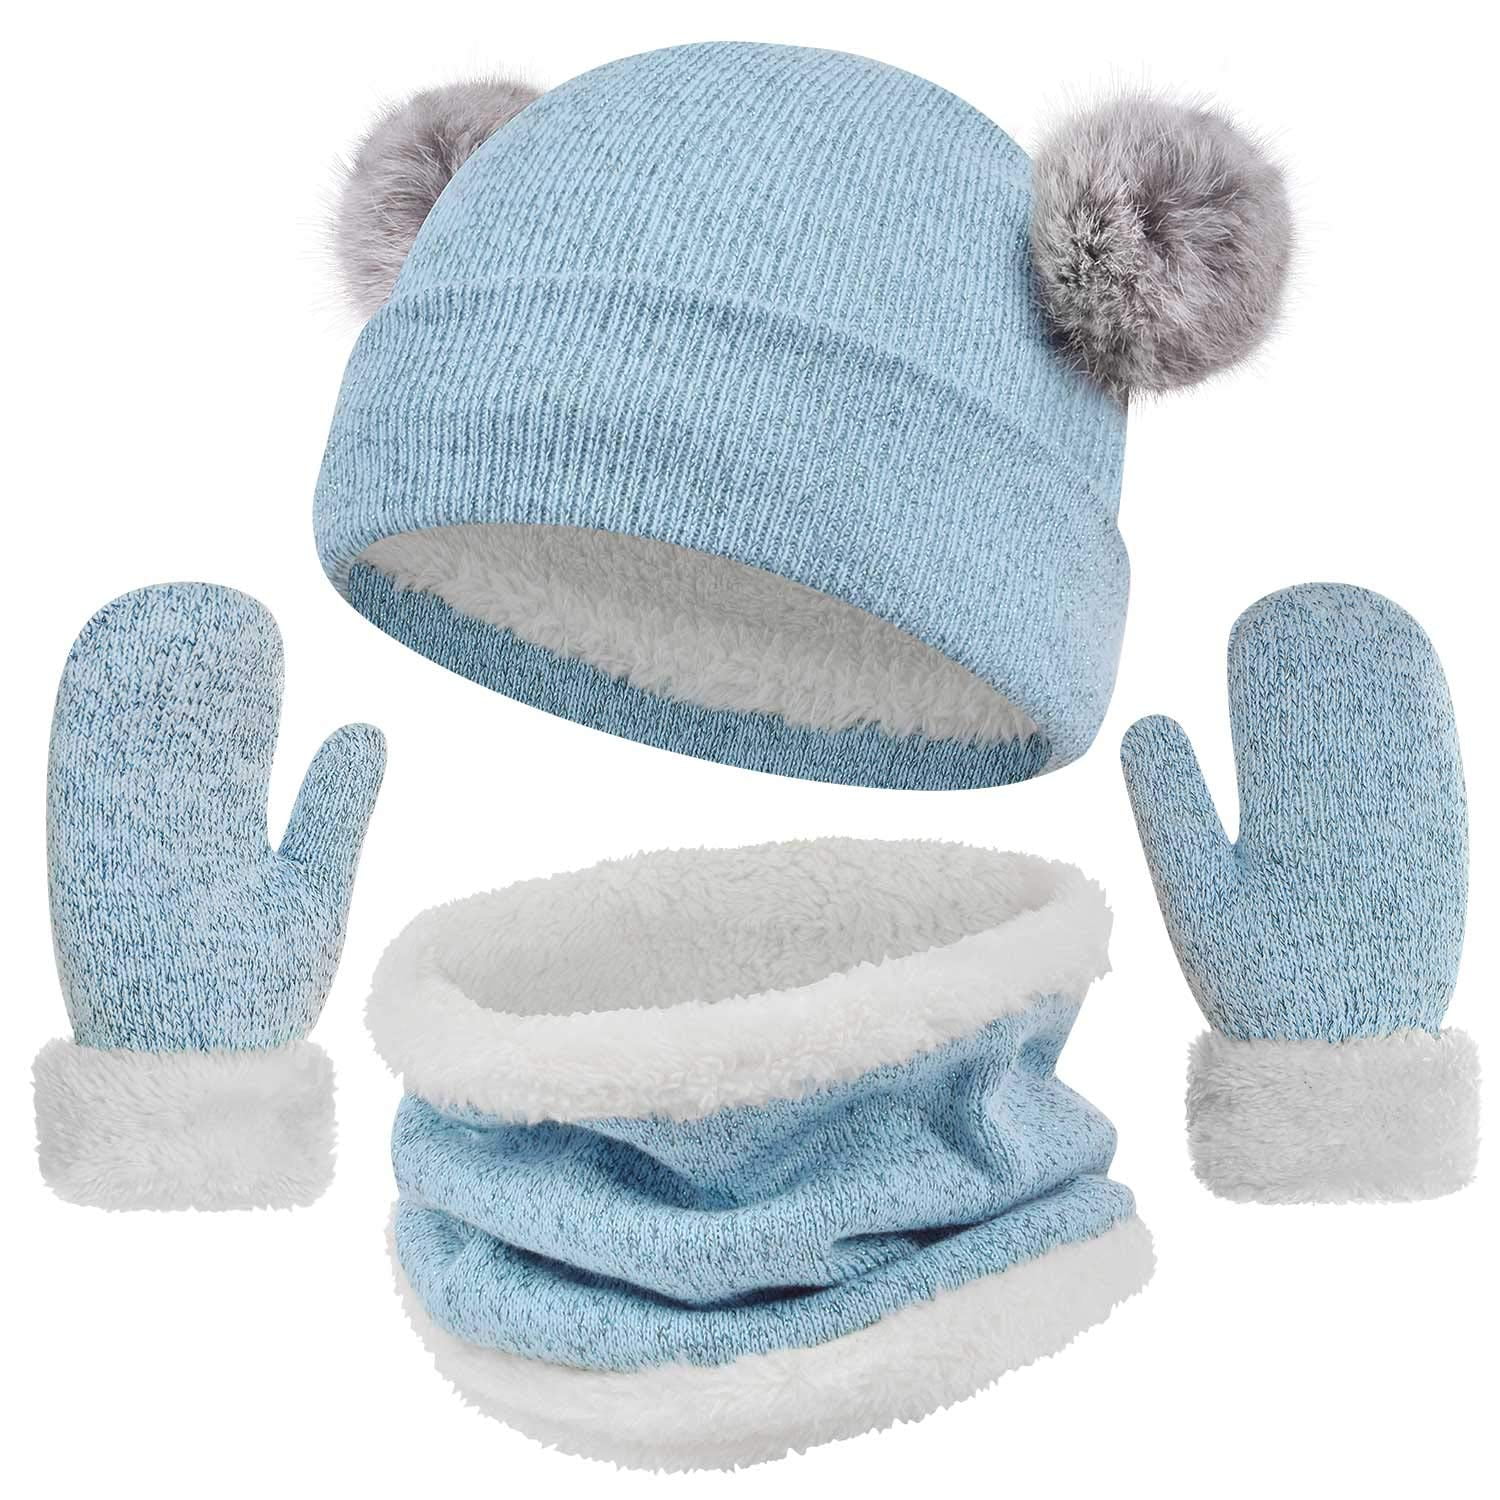 Mothercare Mothercare Baby Boys Blue Hat & Mittens Set Age 3-6 Months 